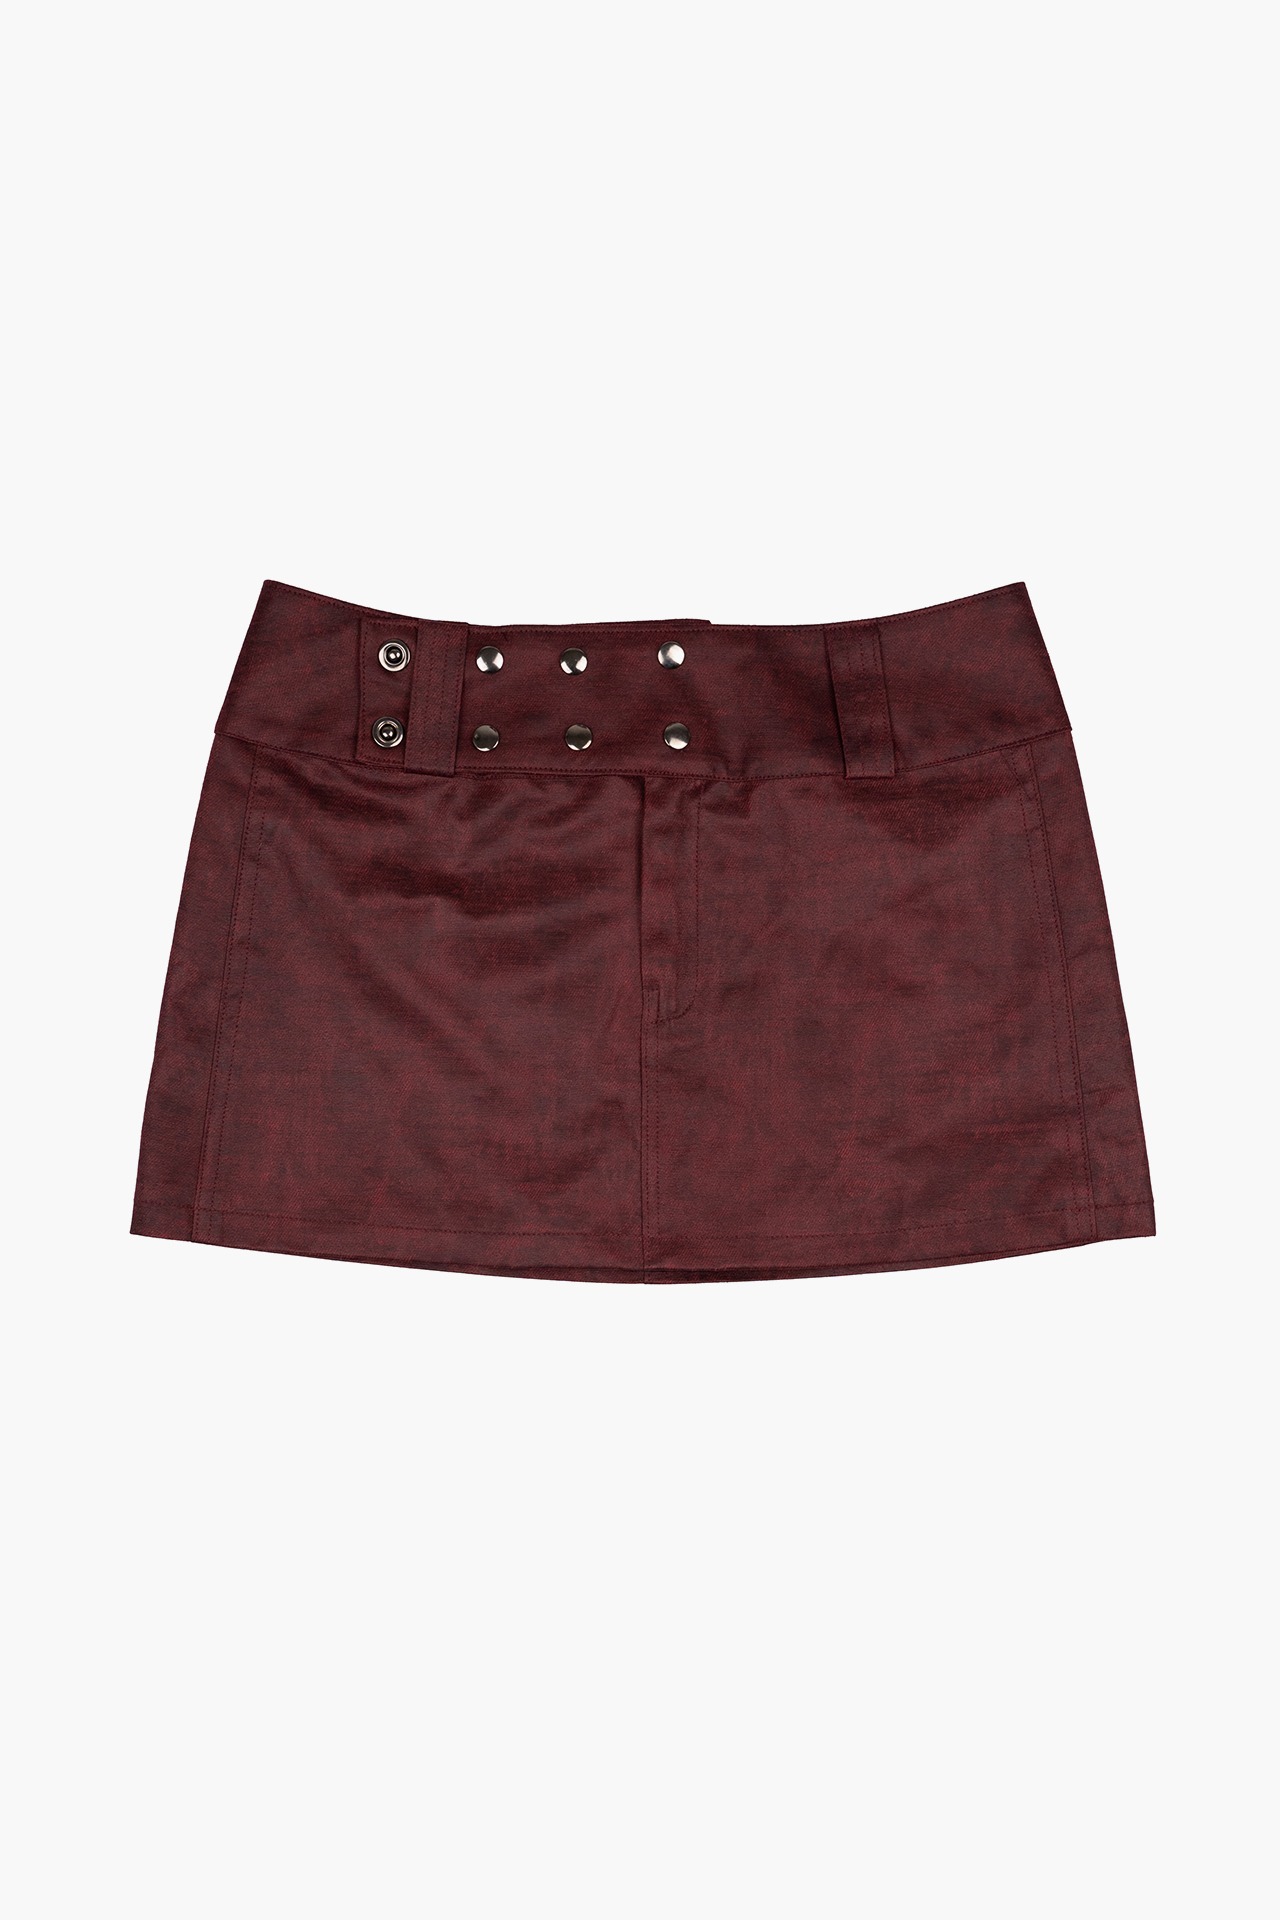 LOW-RISE VINTAGE LEATHER SKIRT WINE